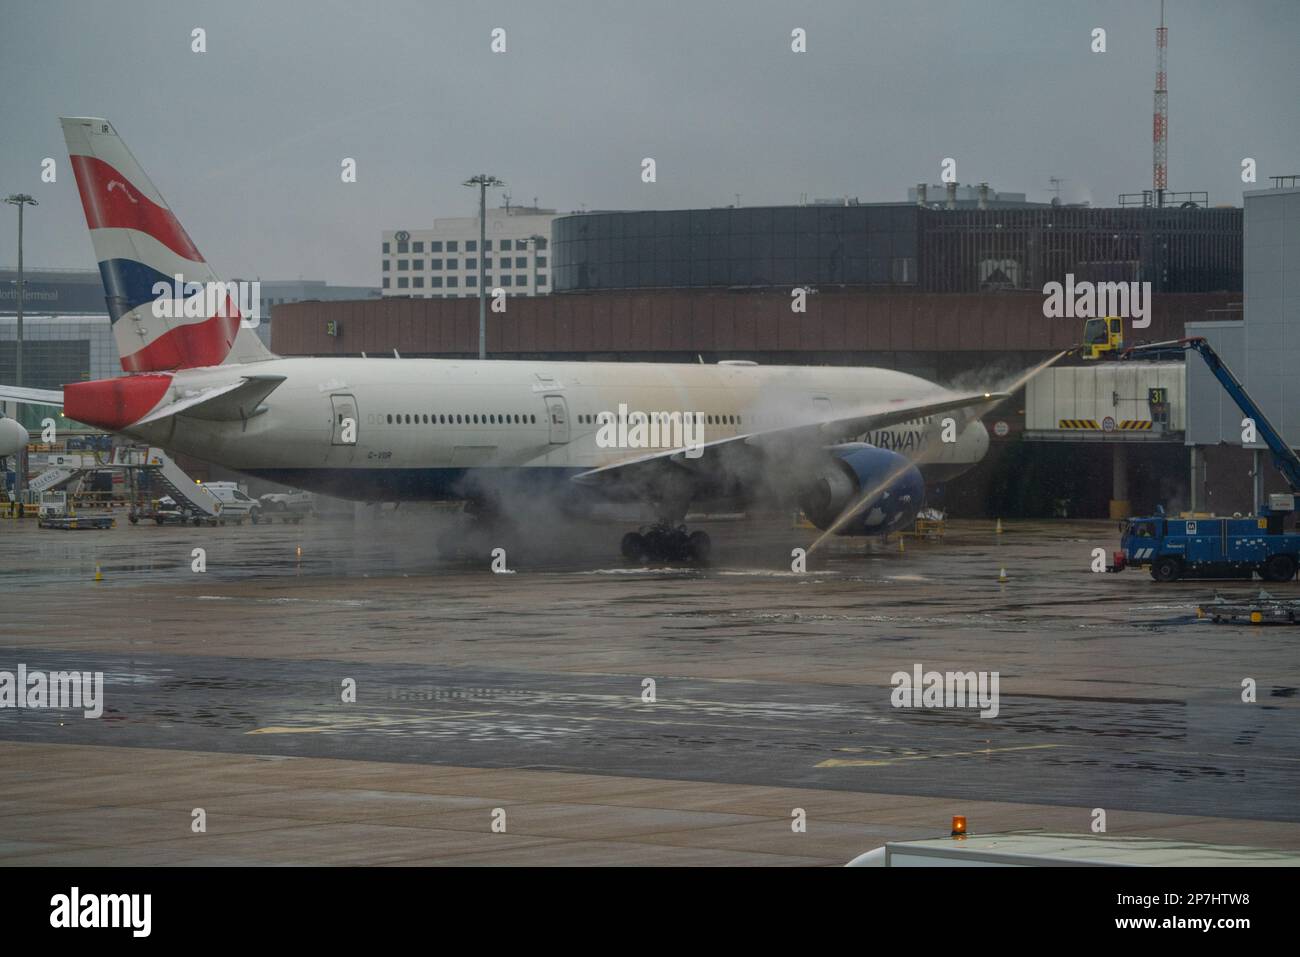 London, UK. 8 March 2023. A British Airways  passenger aircraft  is  sprayed green with De-Icing liquid at Gatwick airport to remove snow and ice . A weather warning has been issued as an Artic blast hits many parts of the UK with freezing temperatures causing travel delays at airports.  Credit: amer ghazzal/Alamy Live News. Credit: amer ghazzal/Alamy Live News Stock Photo